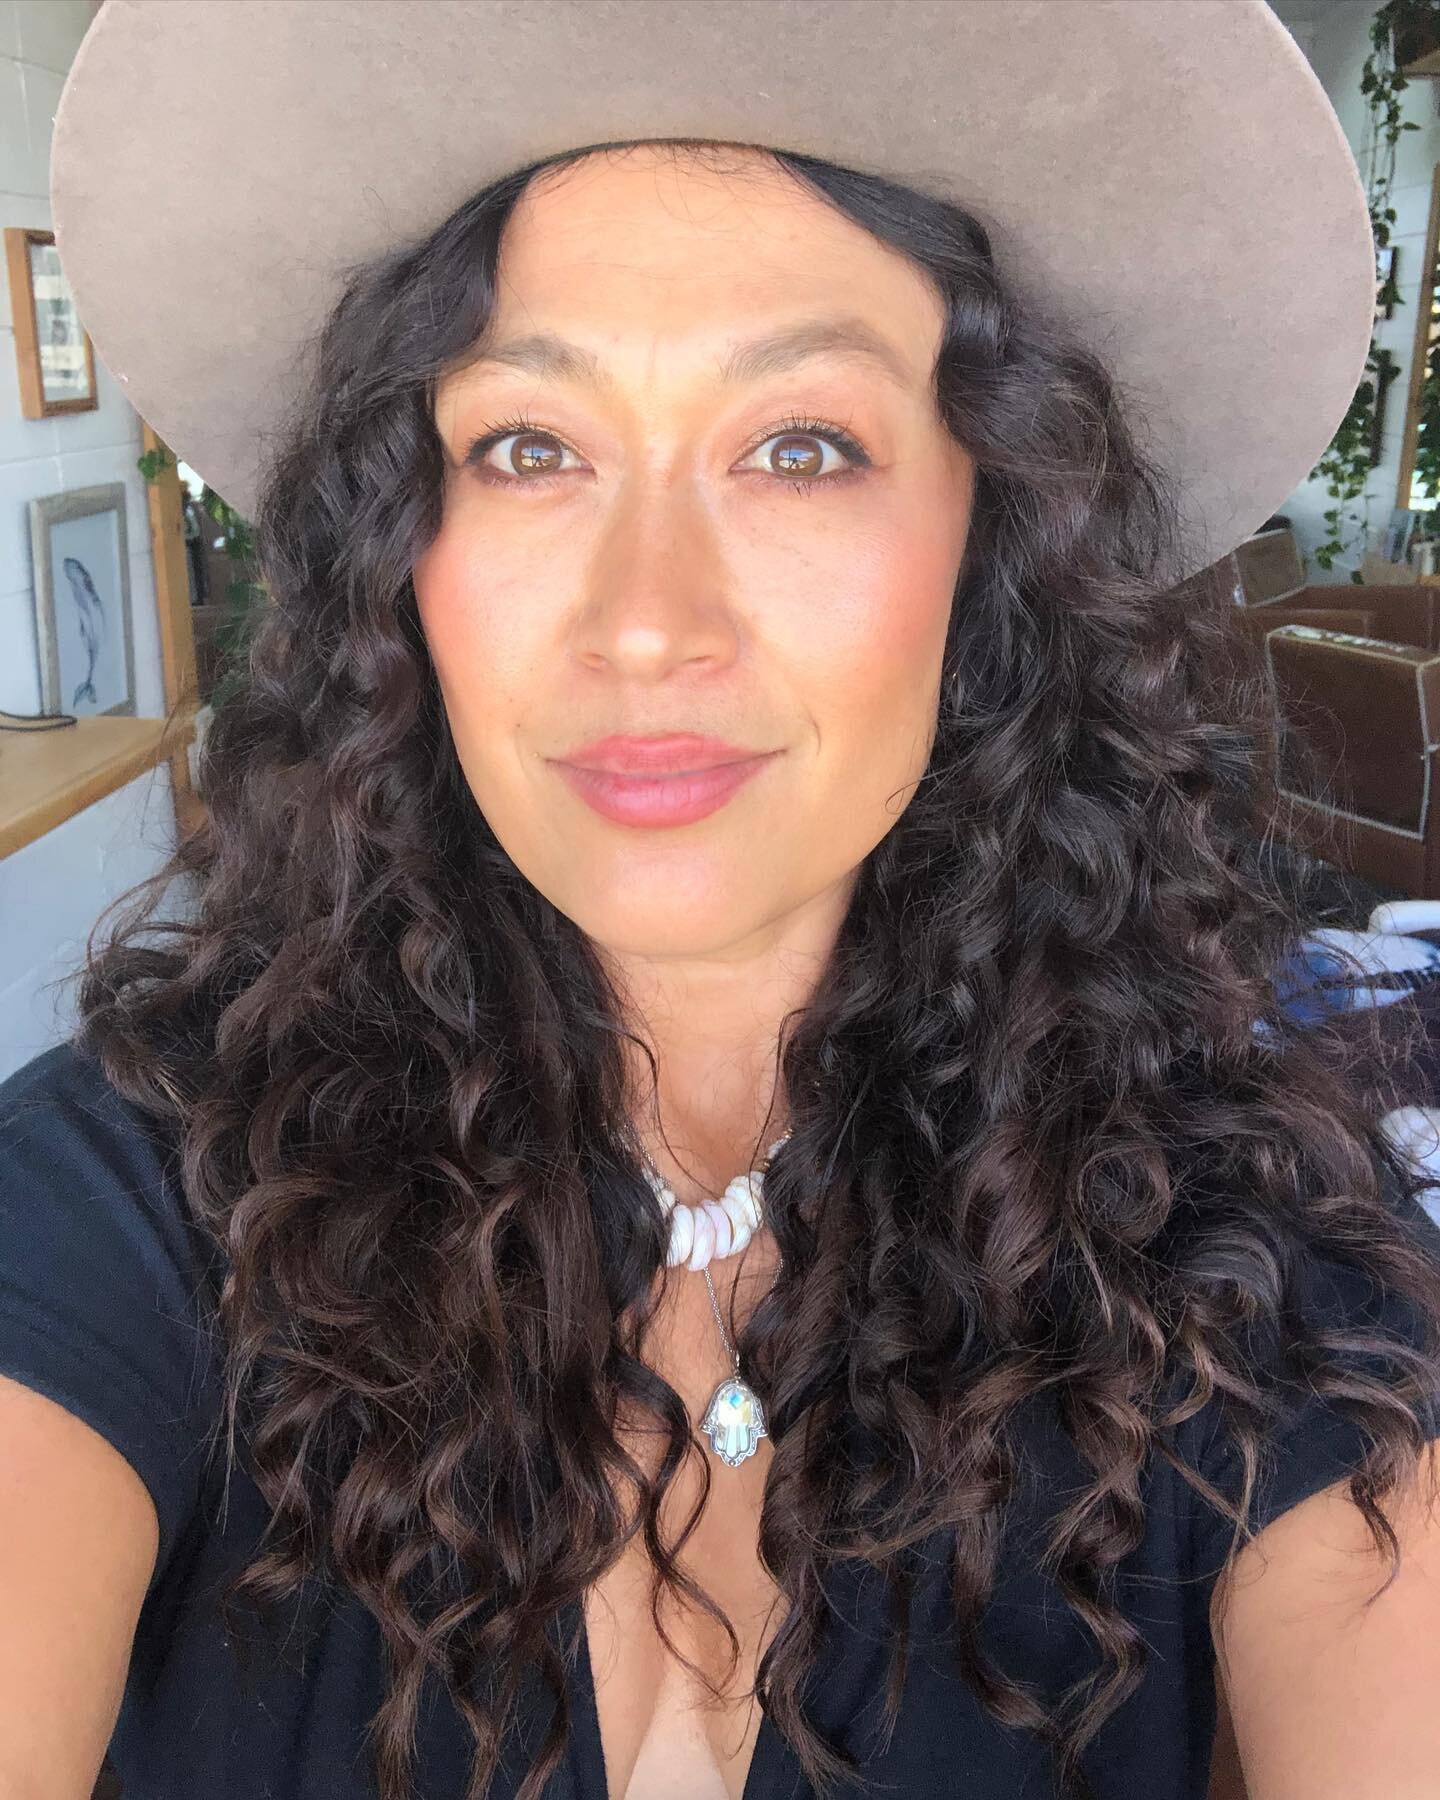 Learning to love your curls 🌀 
Hair journey with @meiliautumnbeauty, this is my favorite yet. Natural texture. learning to work with your hair using the right products and techniques to embrace what you were born with! #davines #davinesnorthamerica 